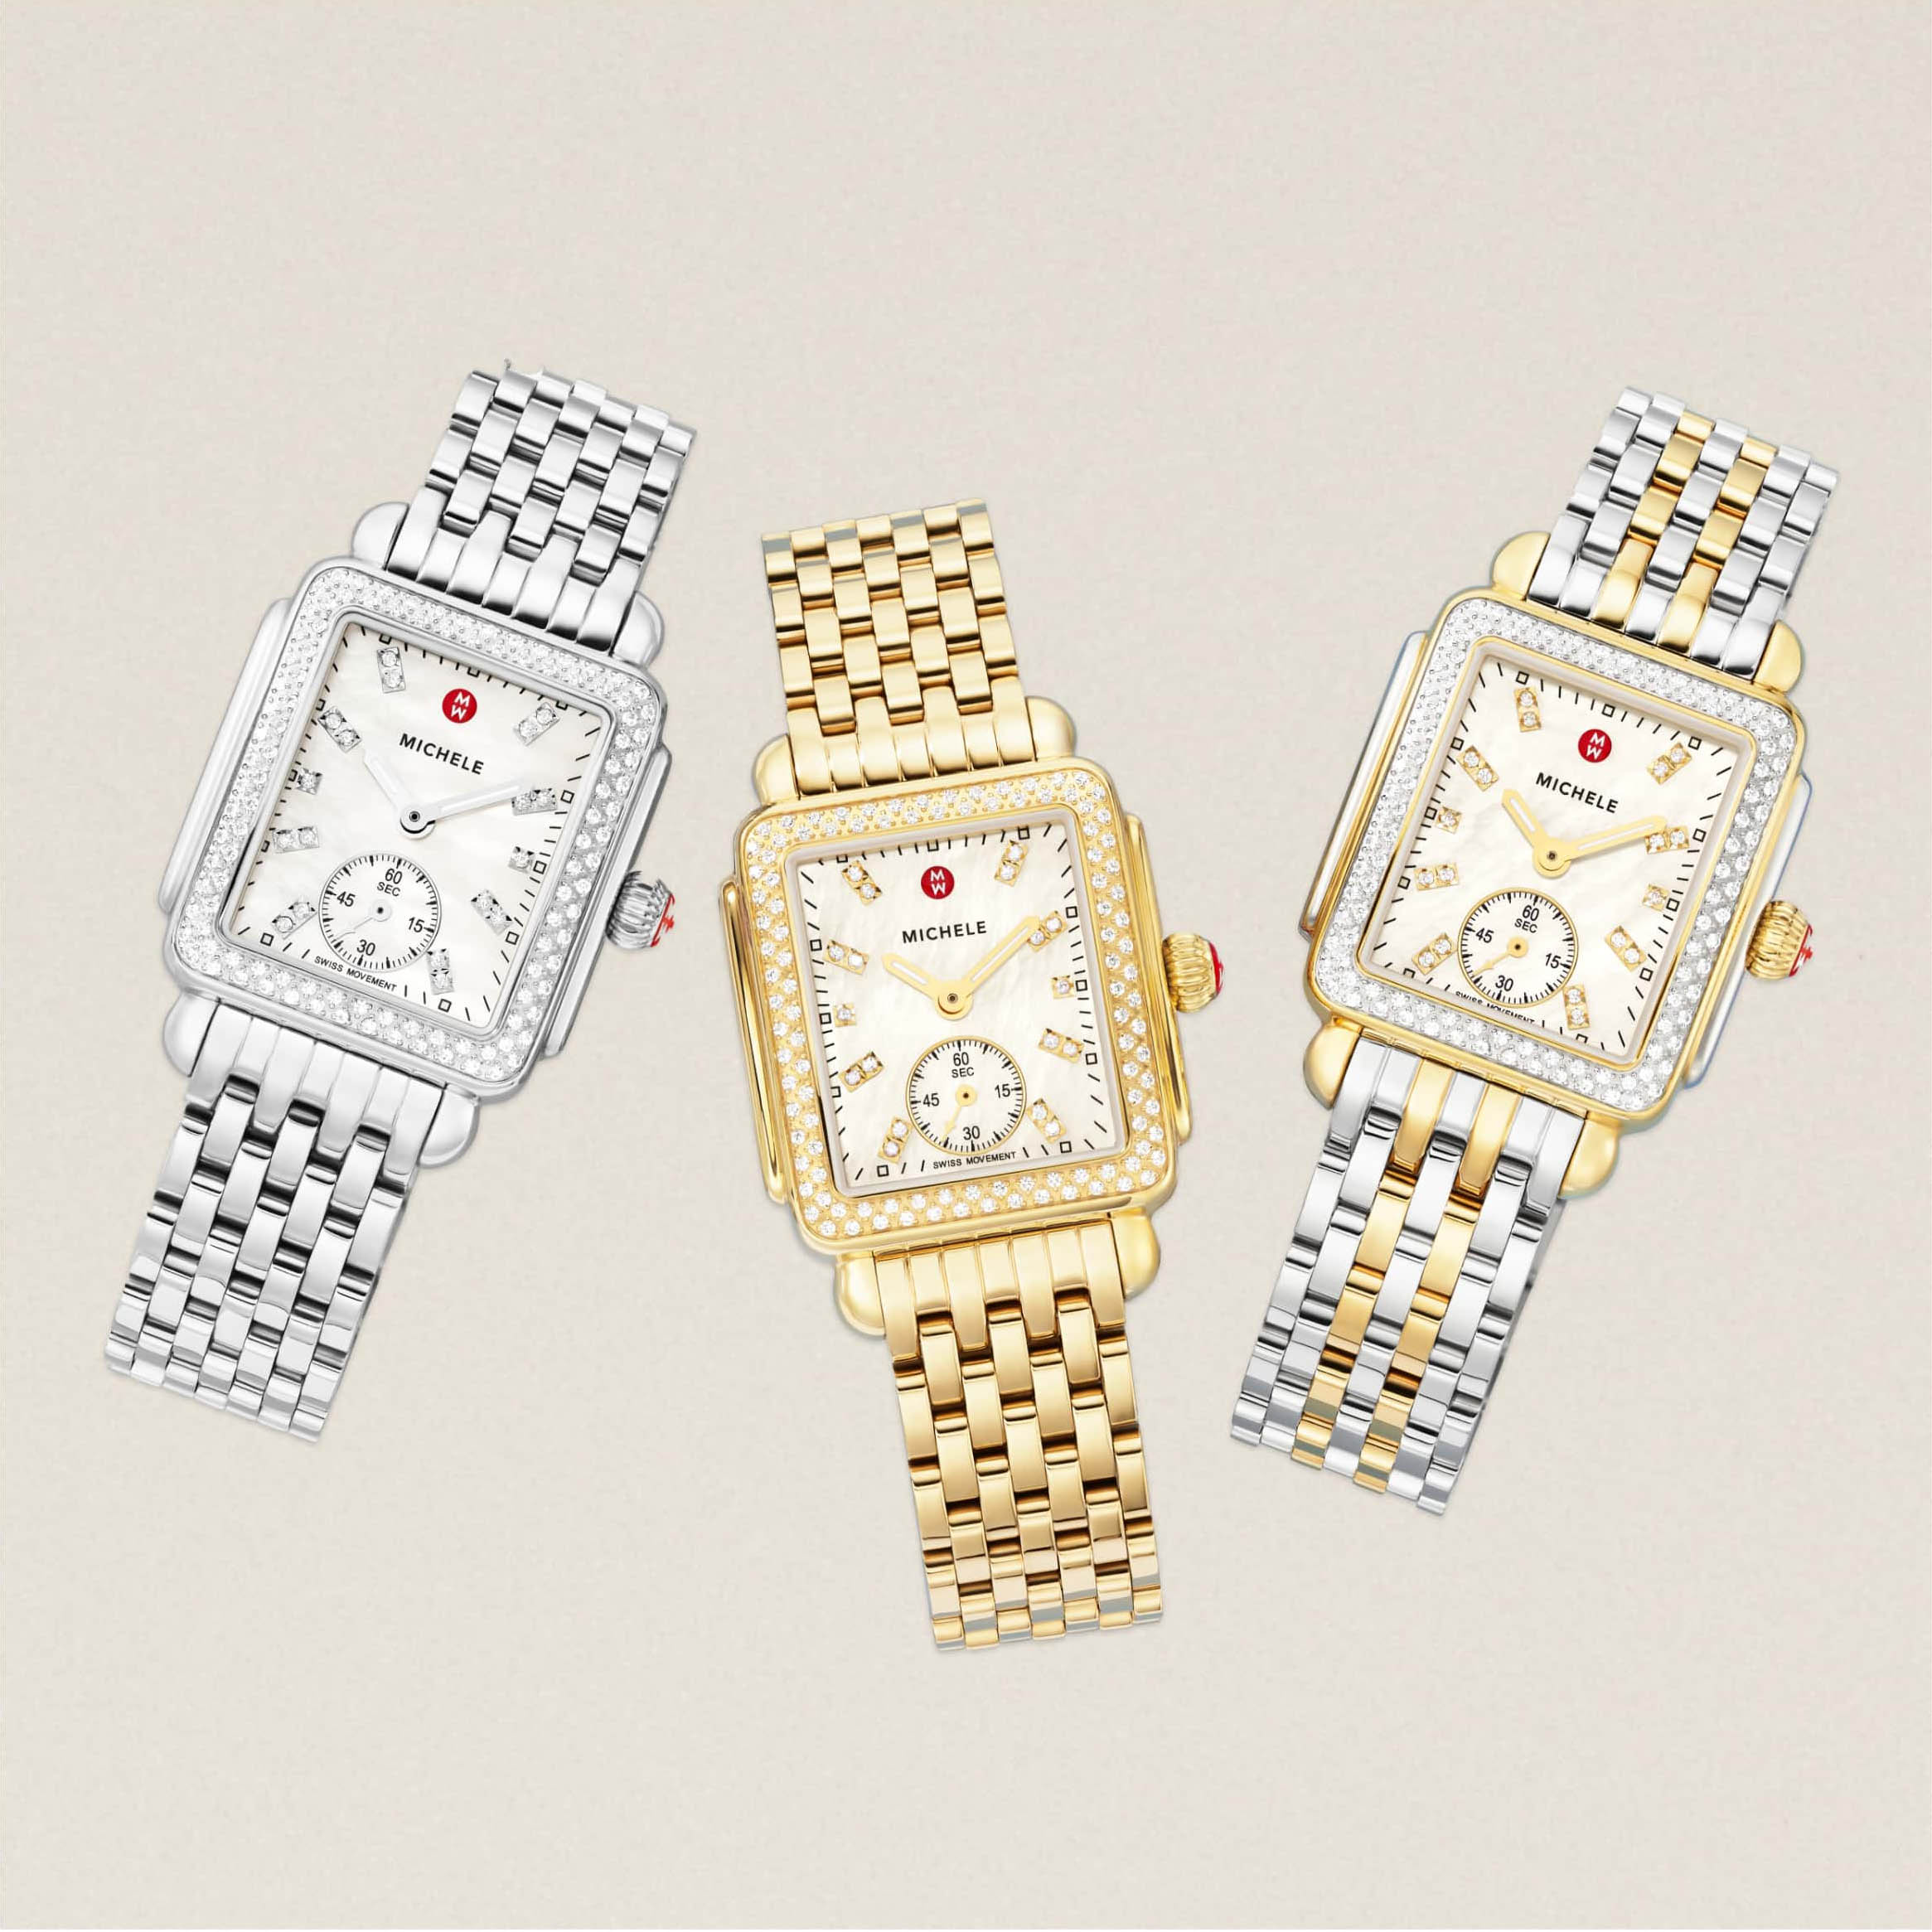 Deco Mid Collection watches.